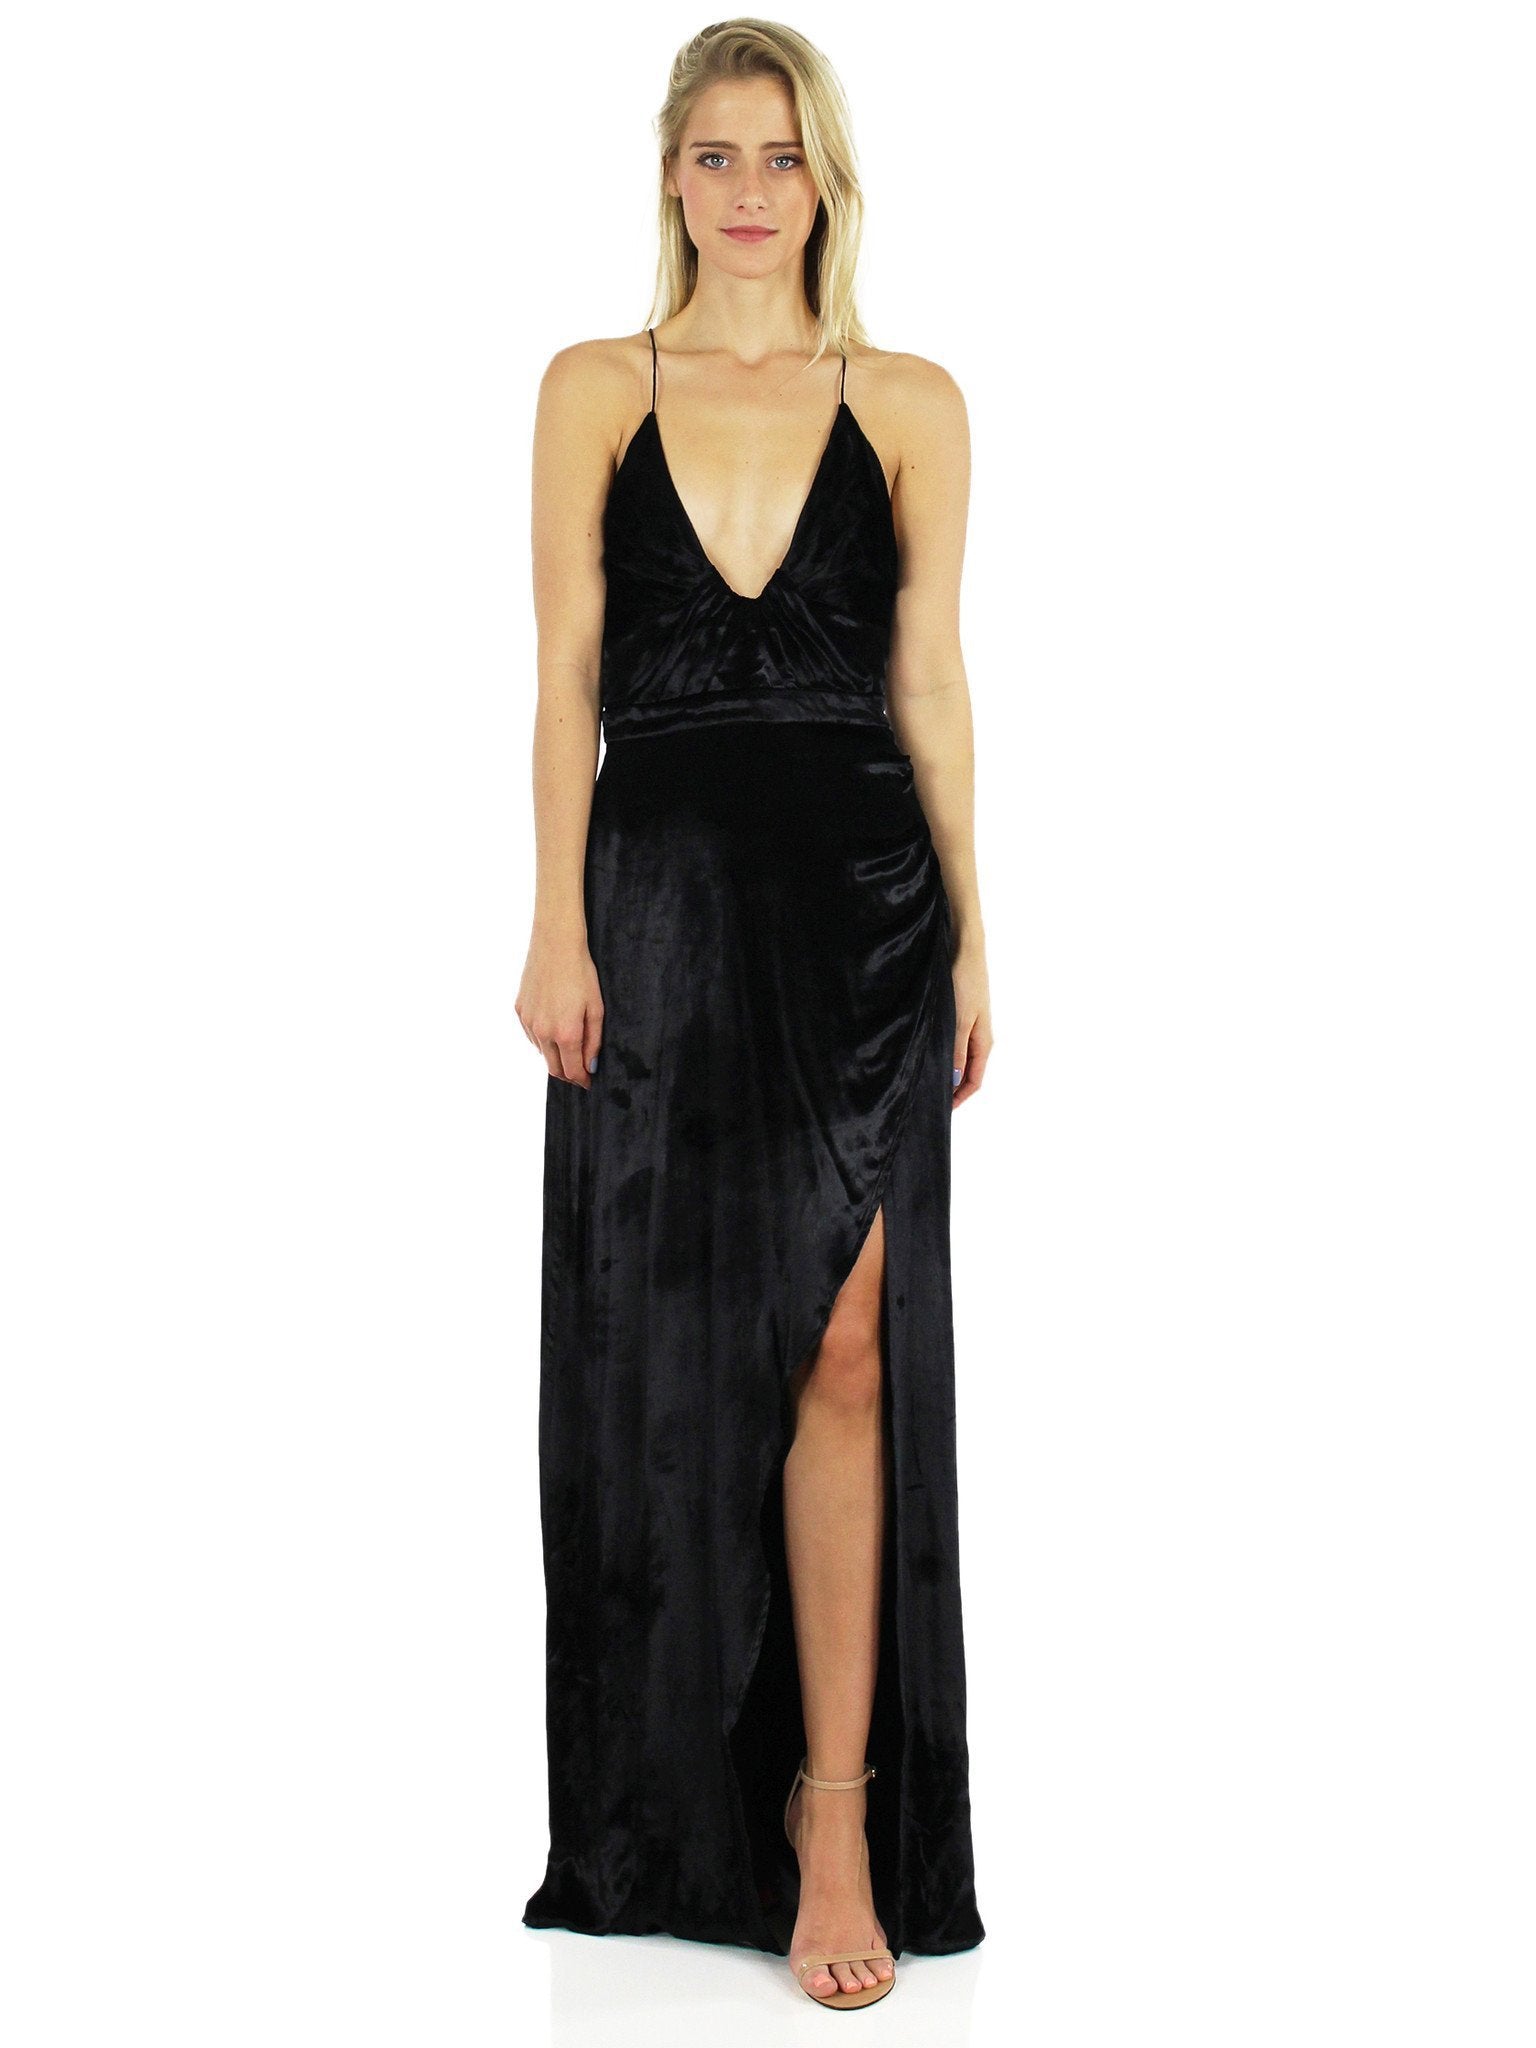 Girl outfit in a dress rental from The Jetset Diaries called Velvet Saskia Maxi Dress